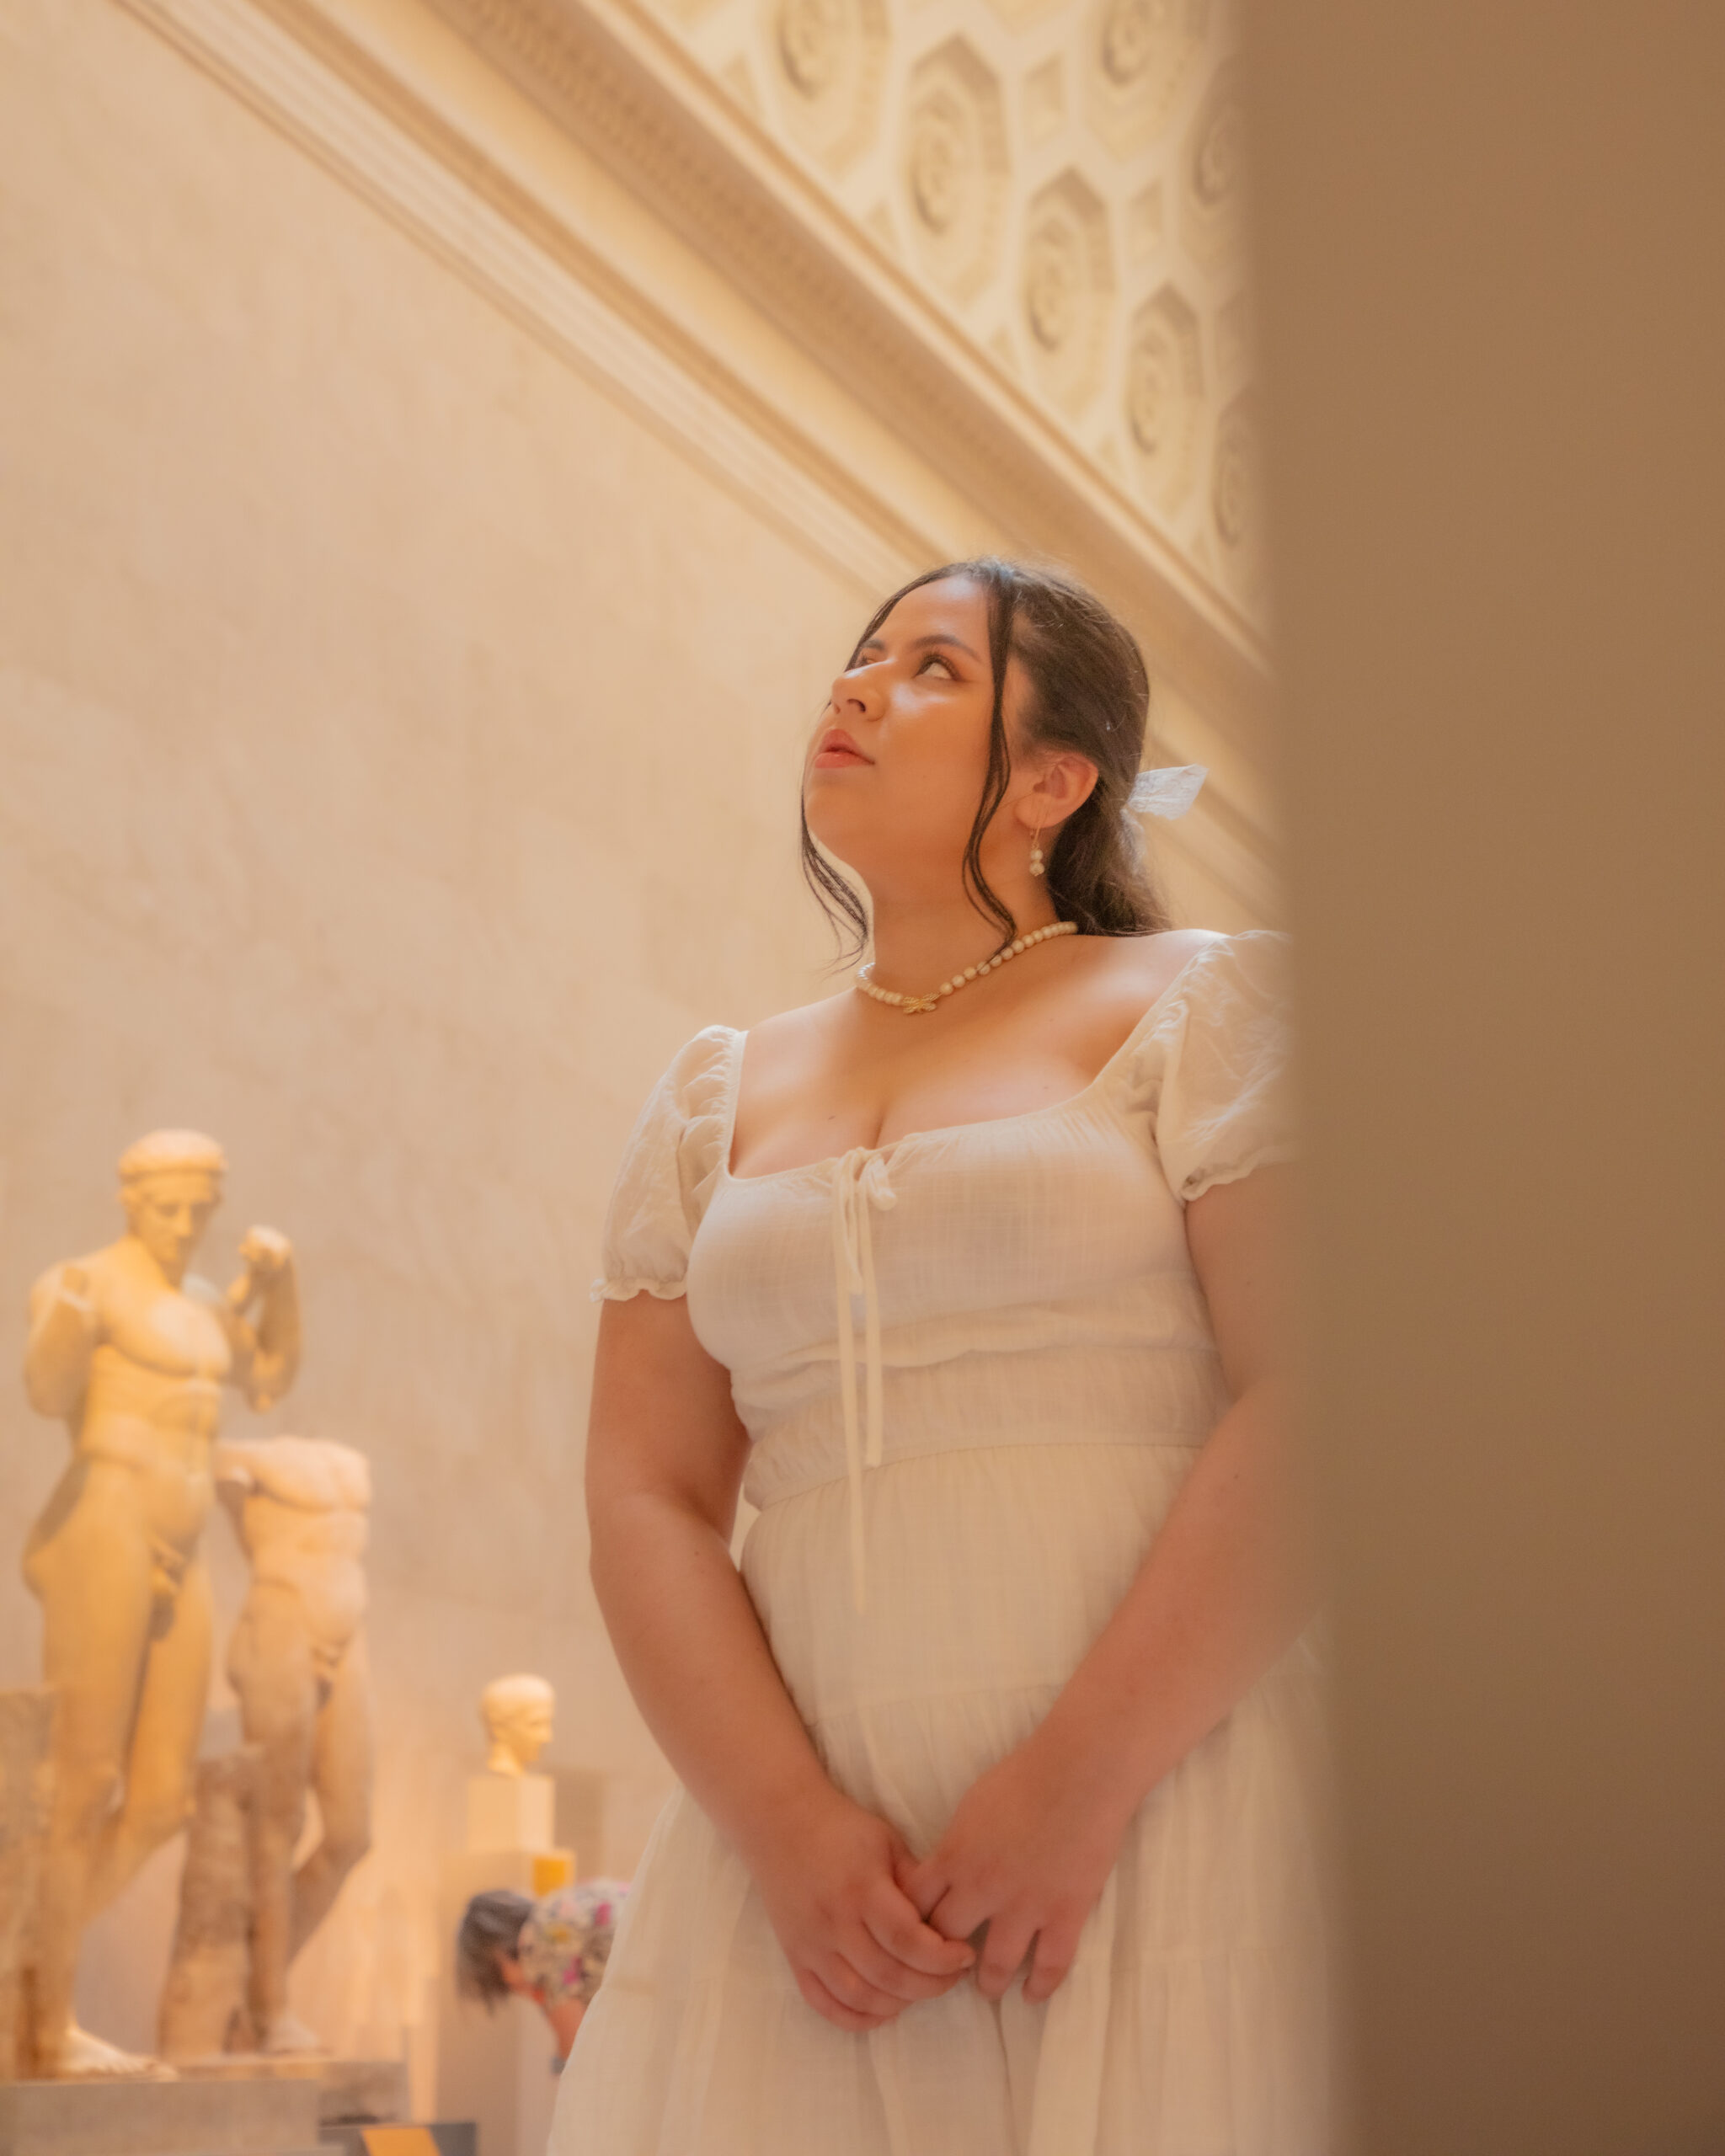 The photograph displays a woman inside a museum, dressed in a white dress with puffed sleeves and adorned with a pearl necklace. She stands with her hands clasped in front of her, looking up thoughtfully. Statues from classical antiquity are visible in the softly lit background, contributing to the cultured ambiance of the setting.